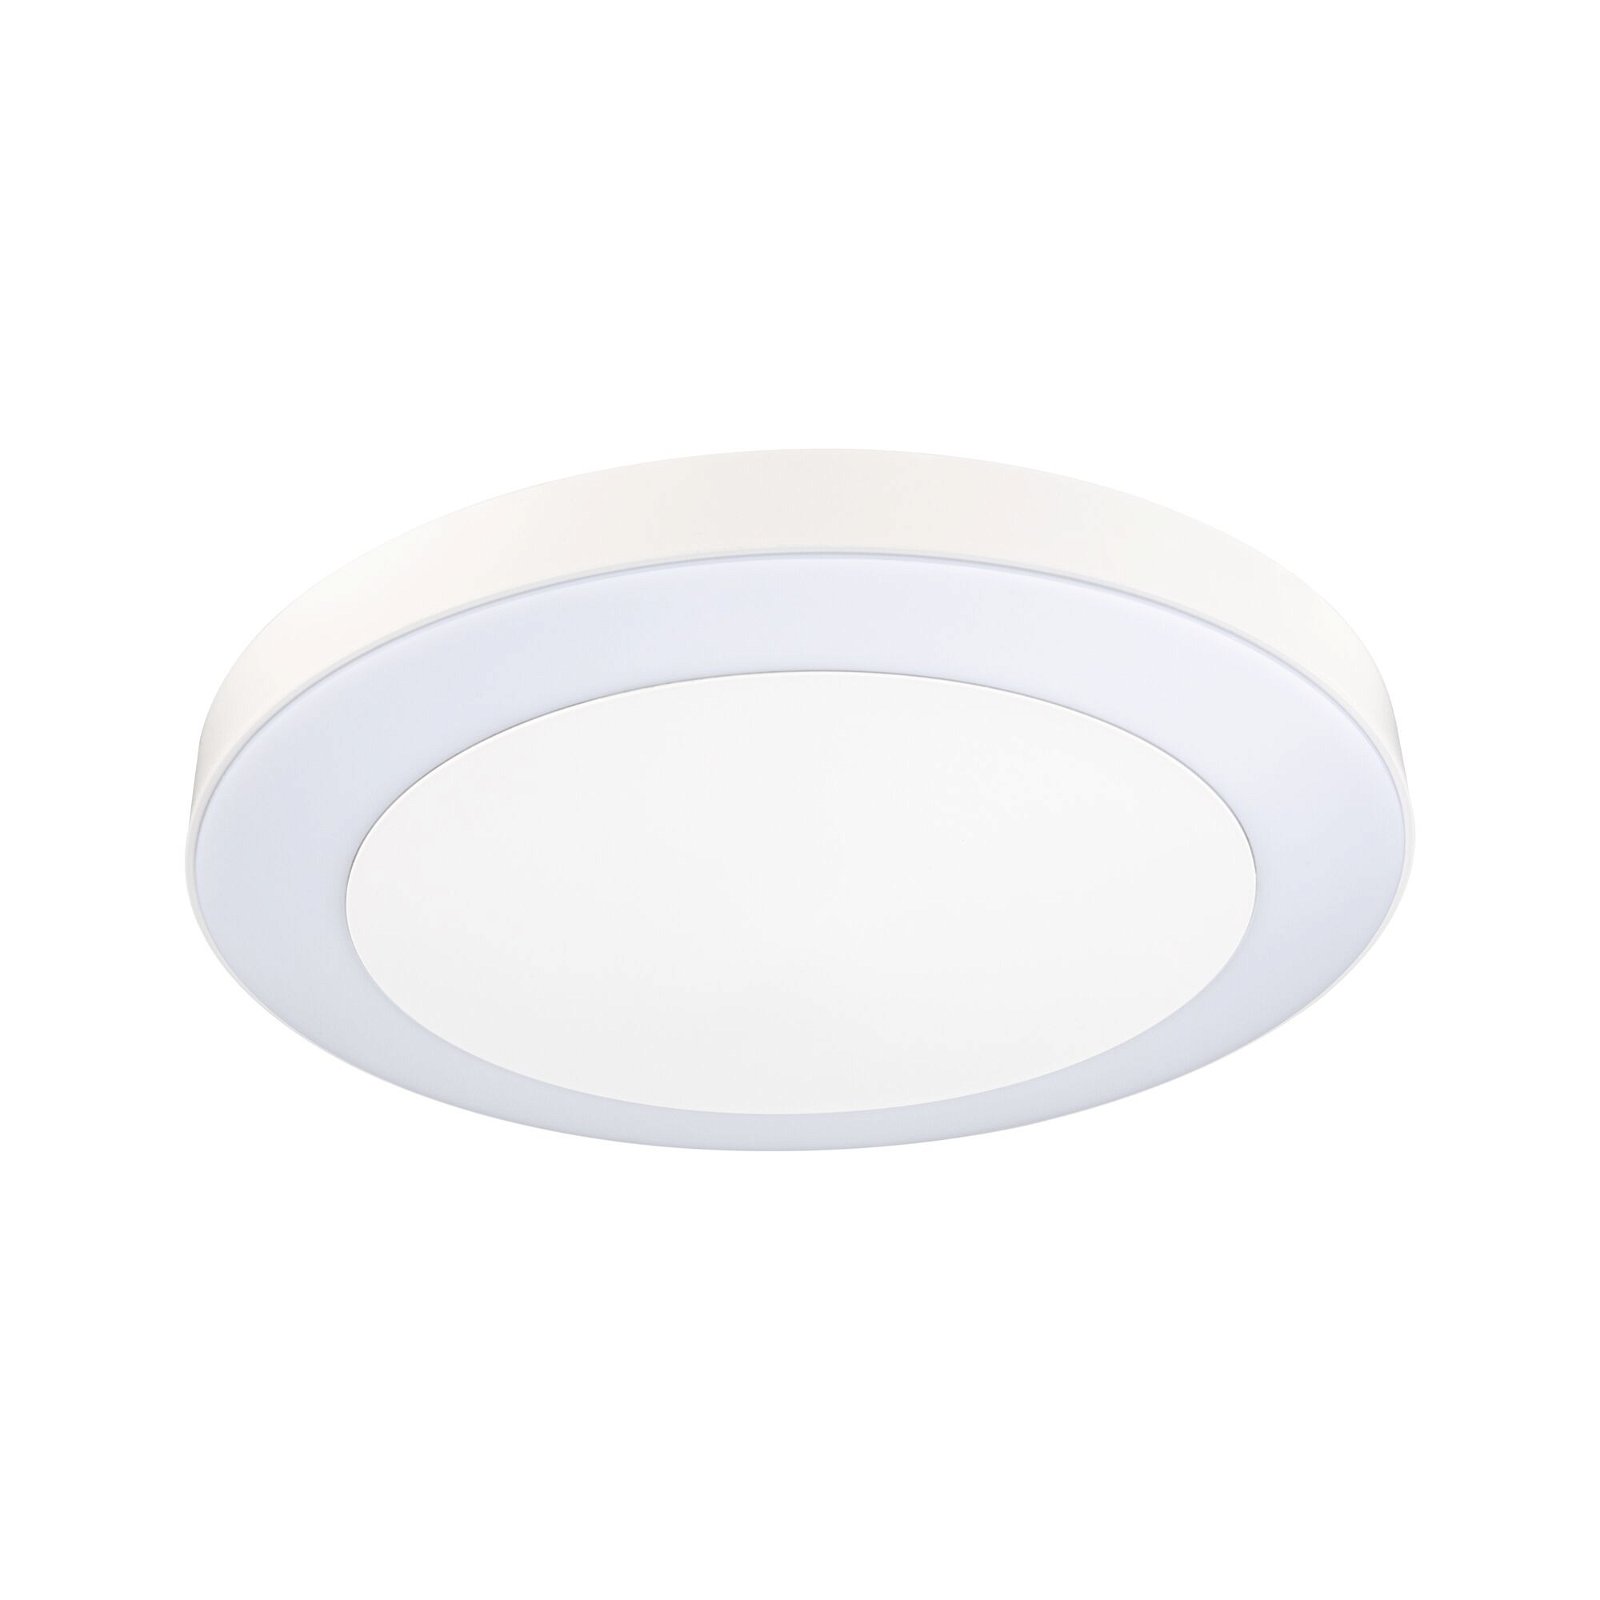 LED Ceiling luminaire Smart Home Zigbee 3.0 Circula Dusk sensor insect-friendly IP44 round 320mm Tunable Warm 14W 880lm 230V White Plastic